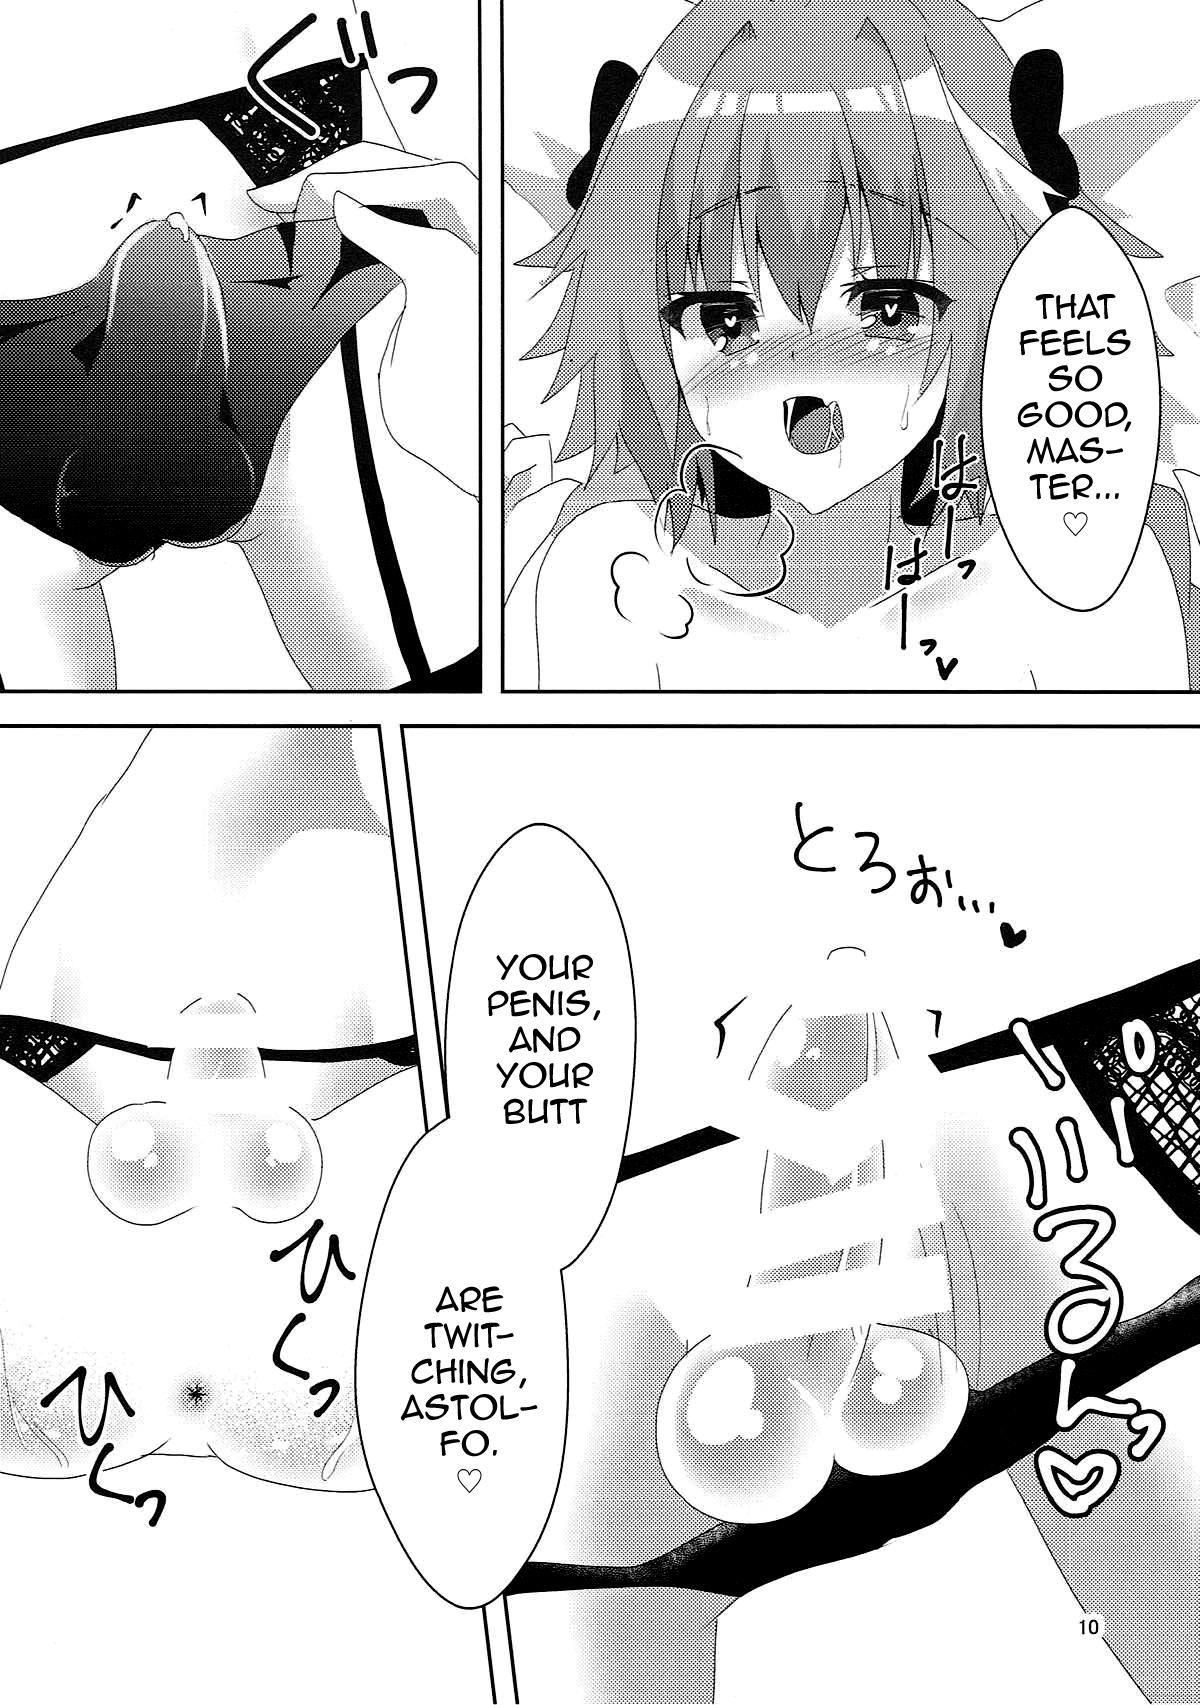 Plug AstolfHeart - Fate grand order Sexy - Page 10